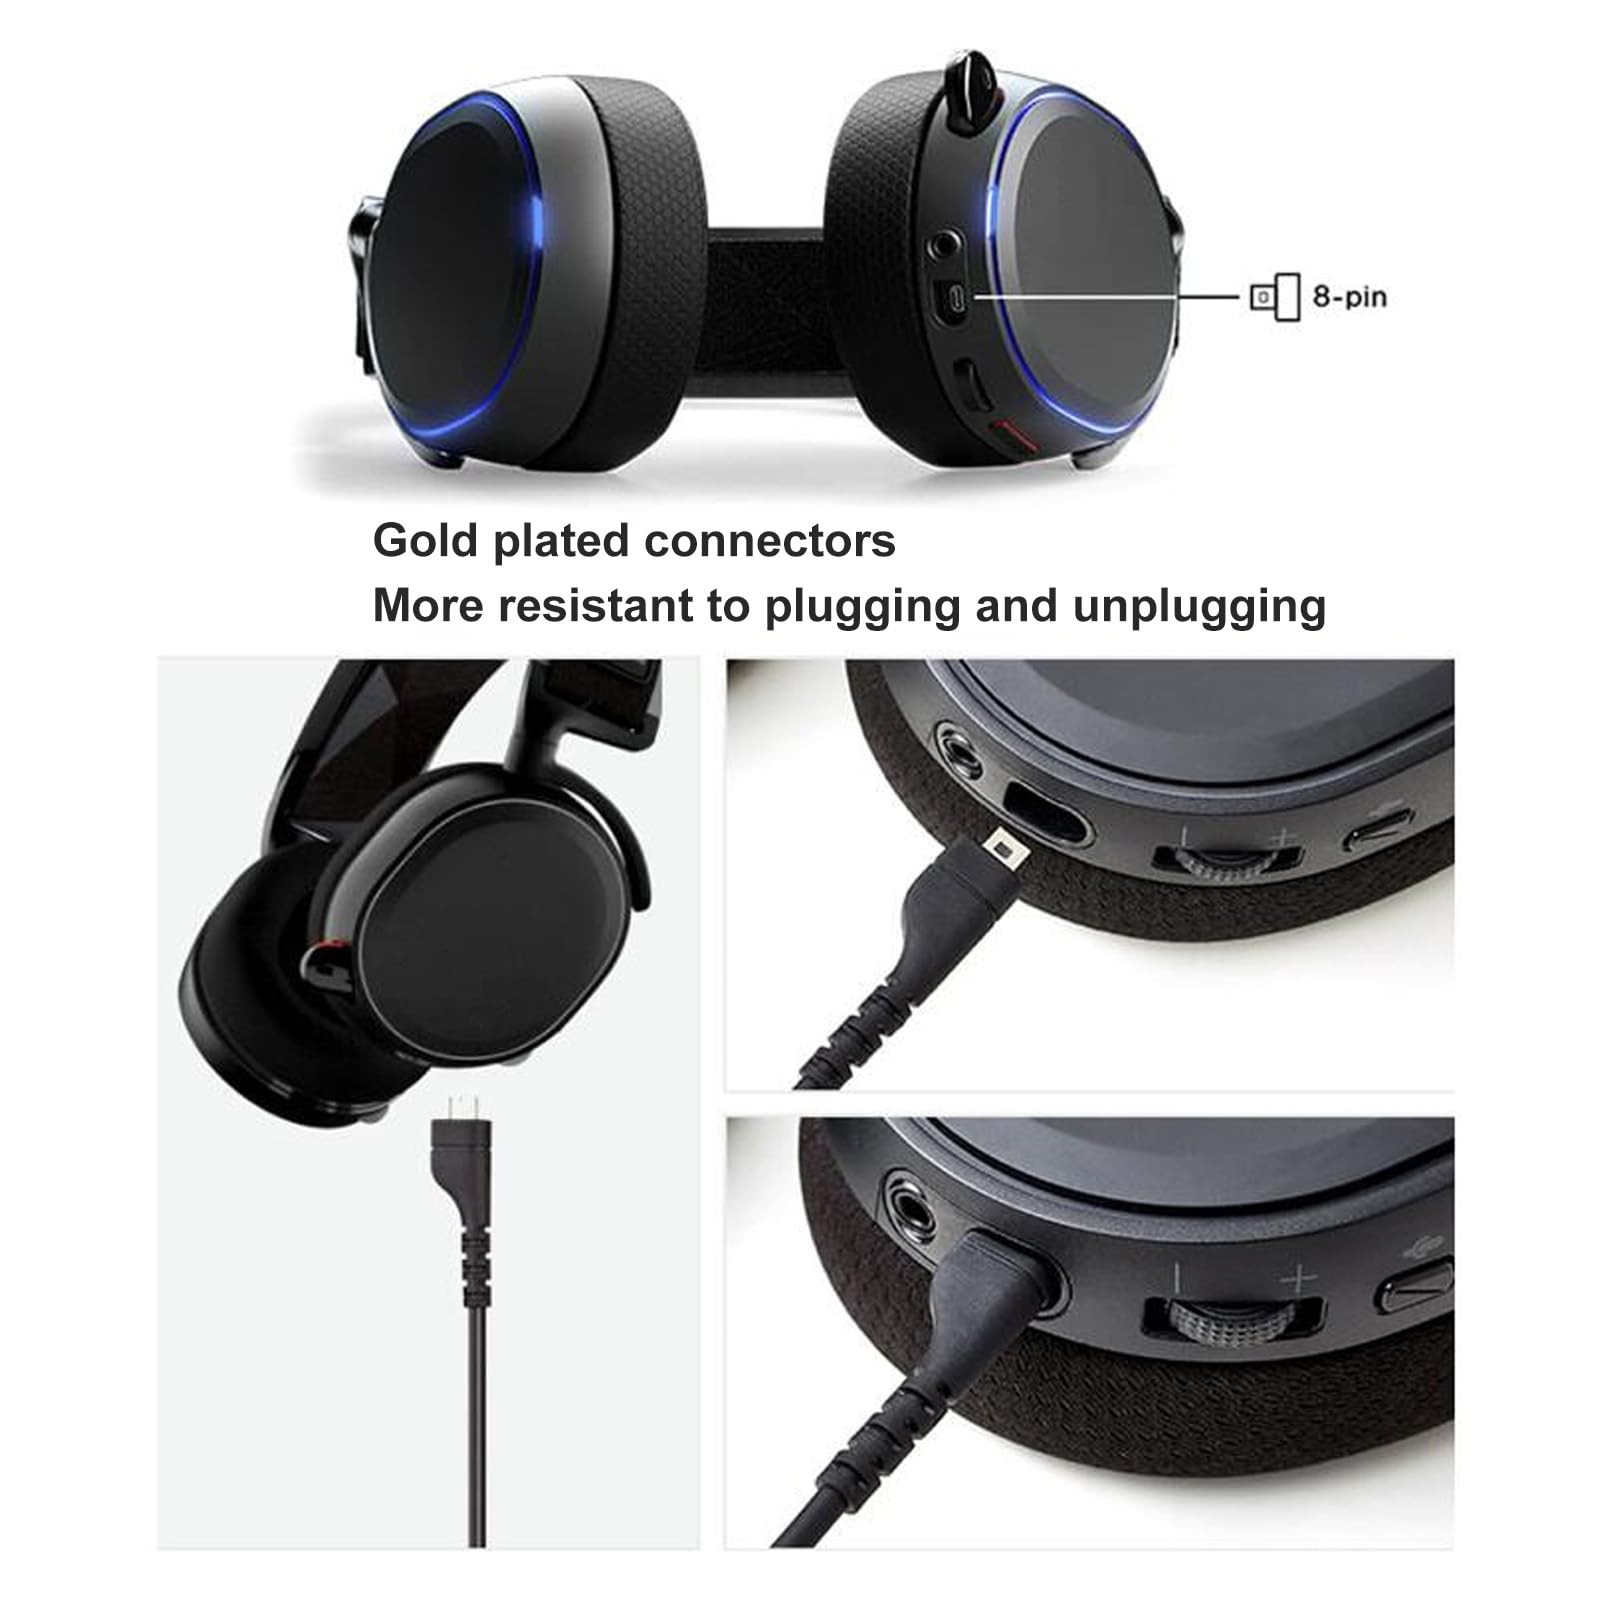 Unplugging and replugging headset